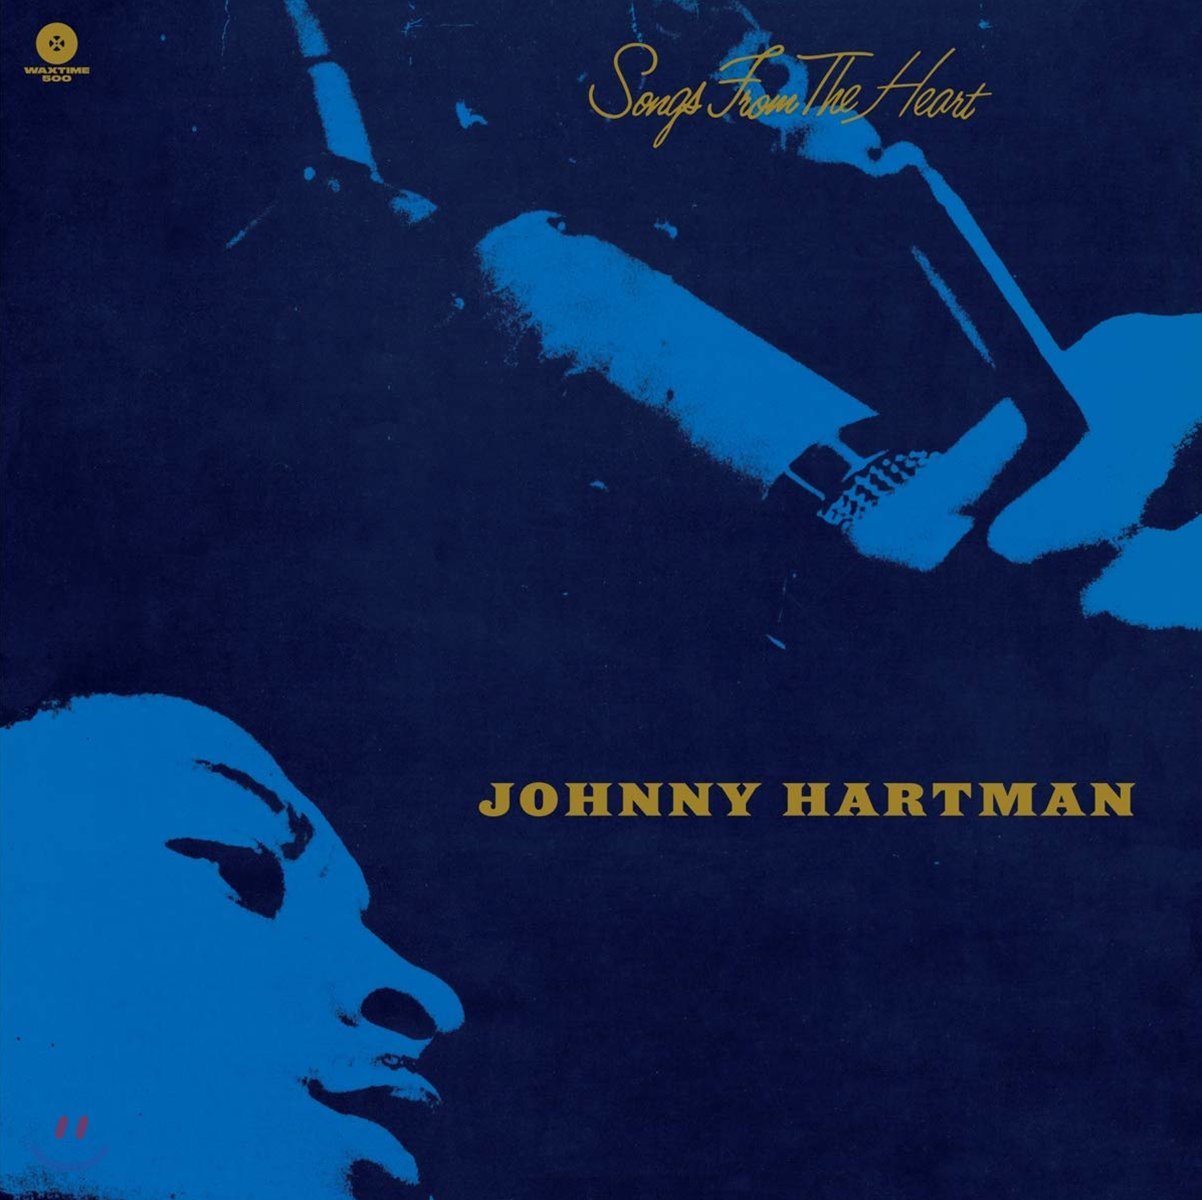 Johnny Hartman (조니 하트만) - Songs From The Heart [LP]